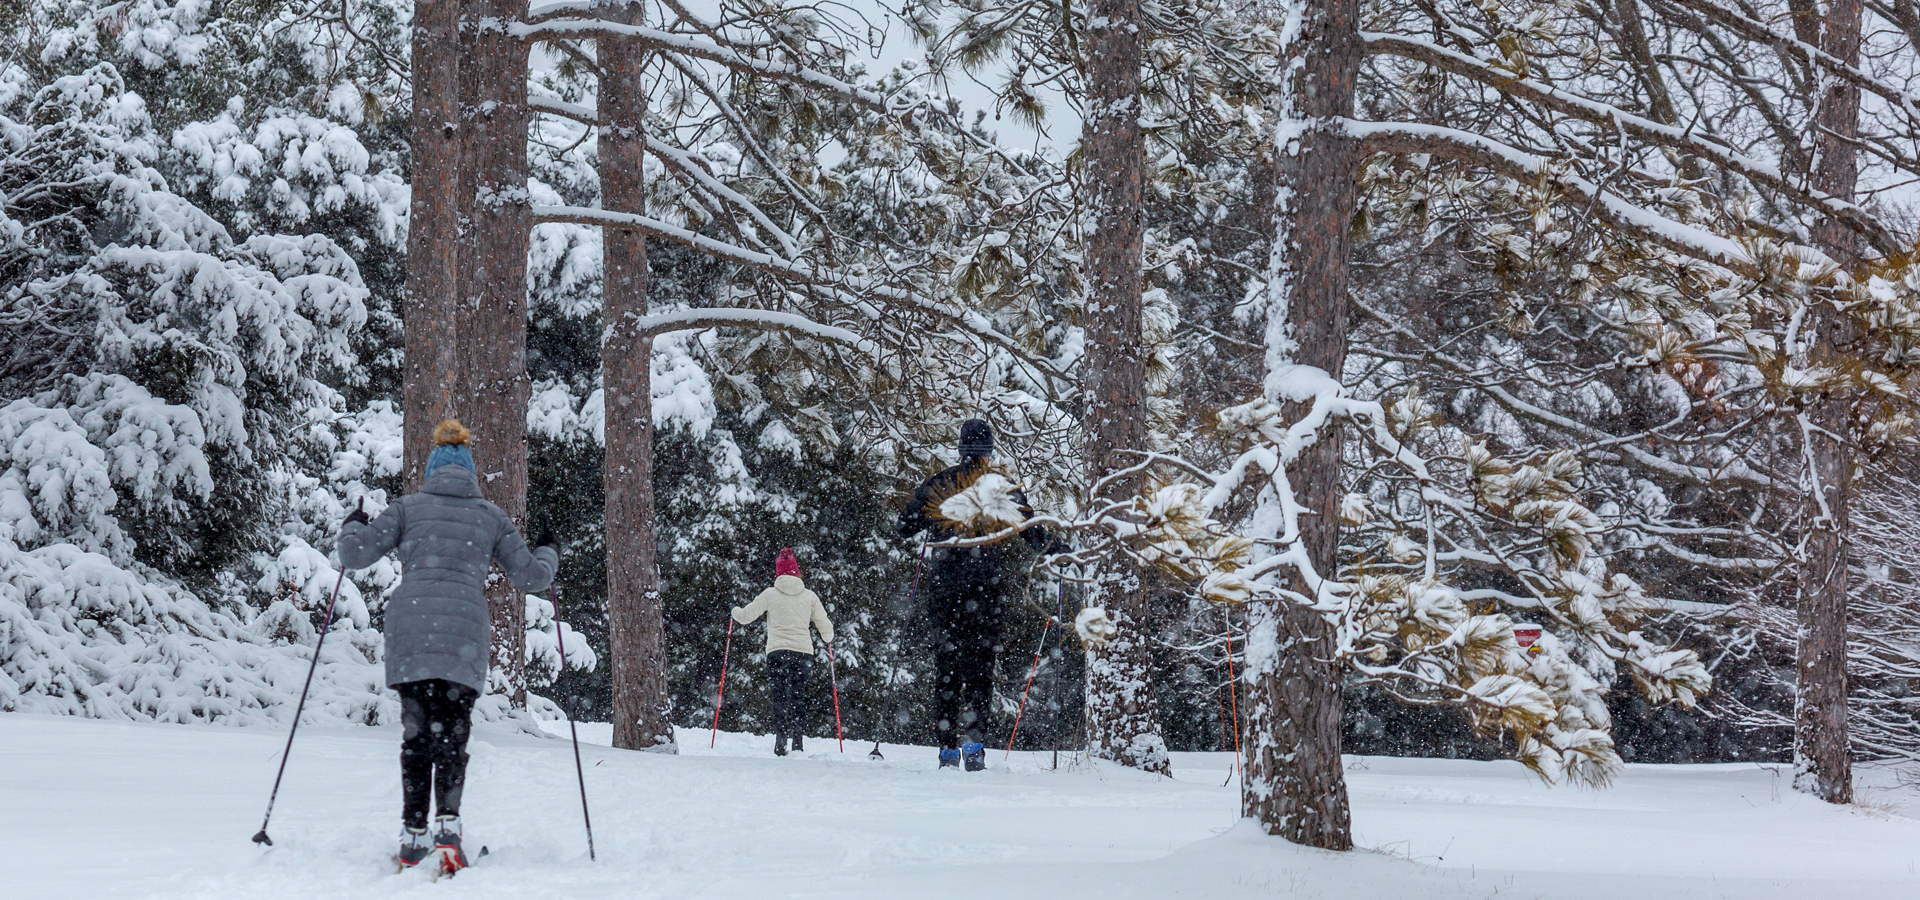 Guests cross country skiing in the winter among trees as it snows